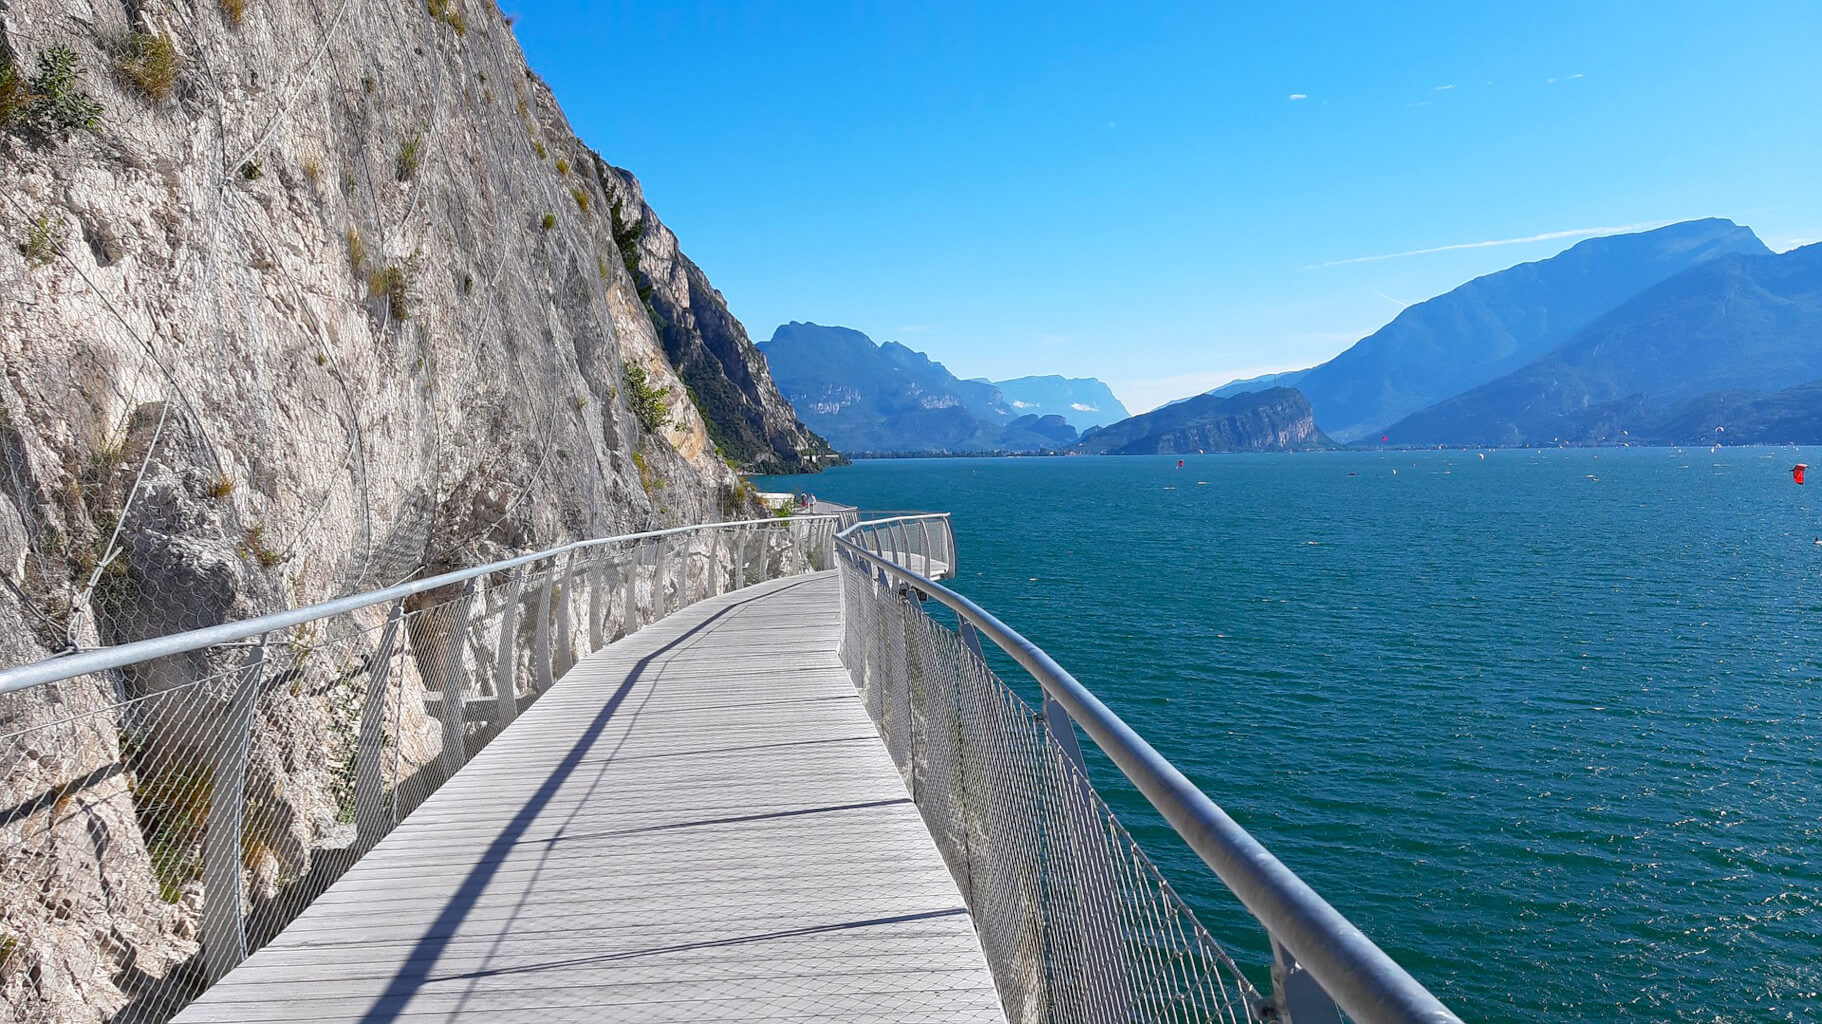 Limone sul Garda: things to do and see